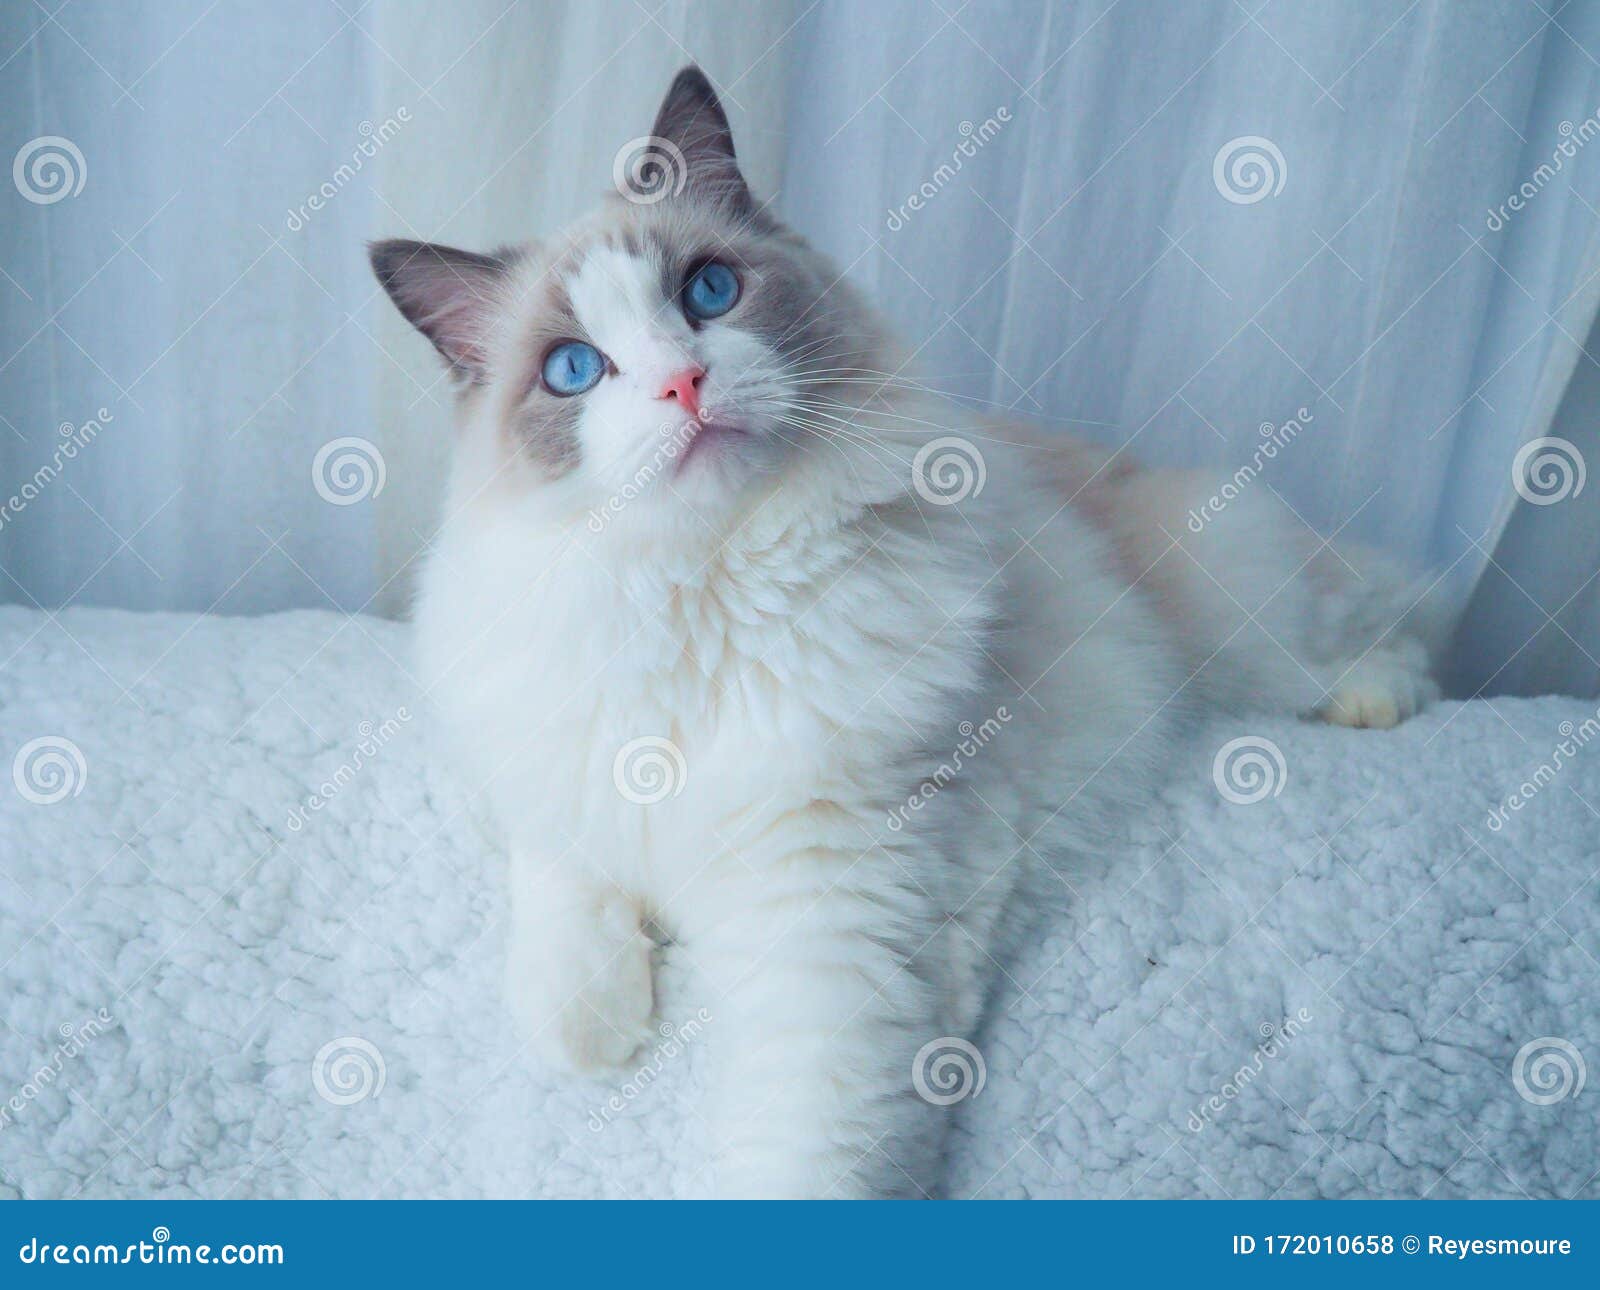 fluffy white cat with beautiful blue eyes.